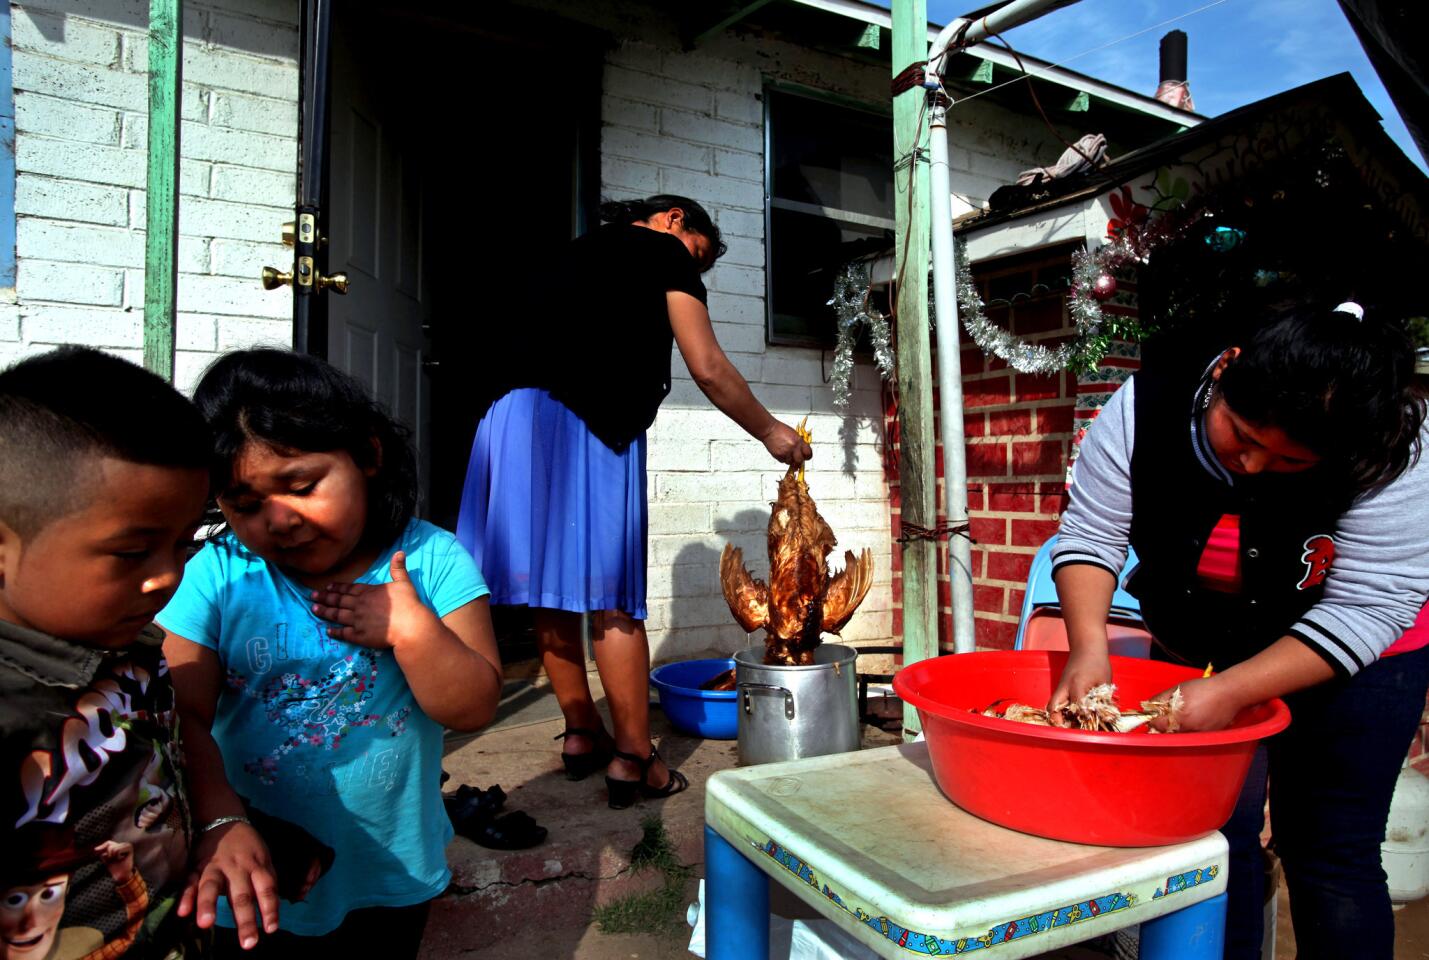 The Vasquez family has members who are eligible for the federal "deferred action" program. They are part of a second wave of applicants, after the educated urban youths, who are applying to get work permits and a two-year reprieve from deportation. Elvira Vasquez, right, plucks chickens as her son Miguel, 4, left, and niece Lydia, 4, stand nearby.